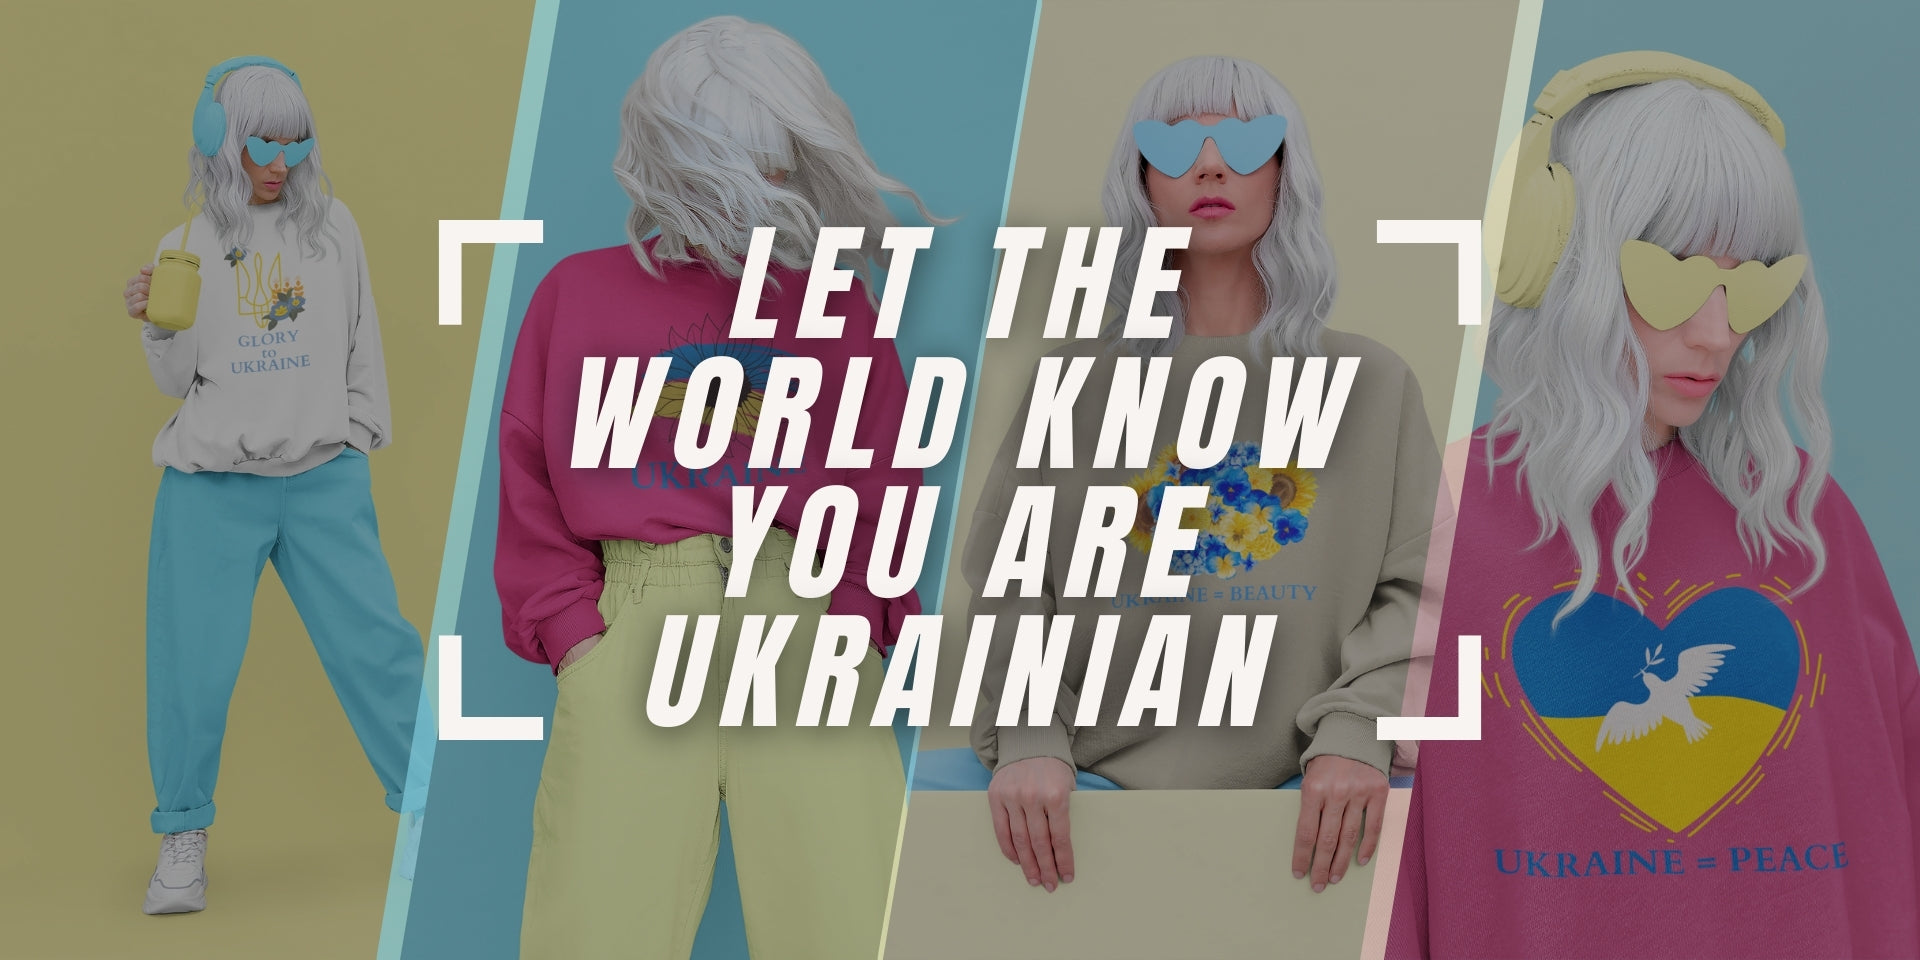 A vibrant visual featuring the text 'Let the world know you are Ukrainian' in bold typography against a background showcasing traditional Ukrainian themed clothing